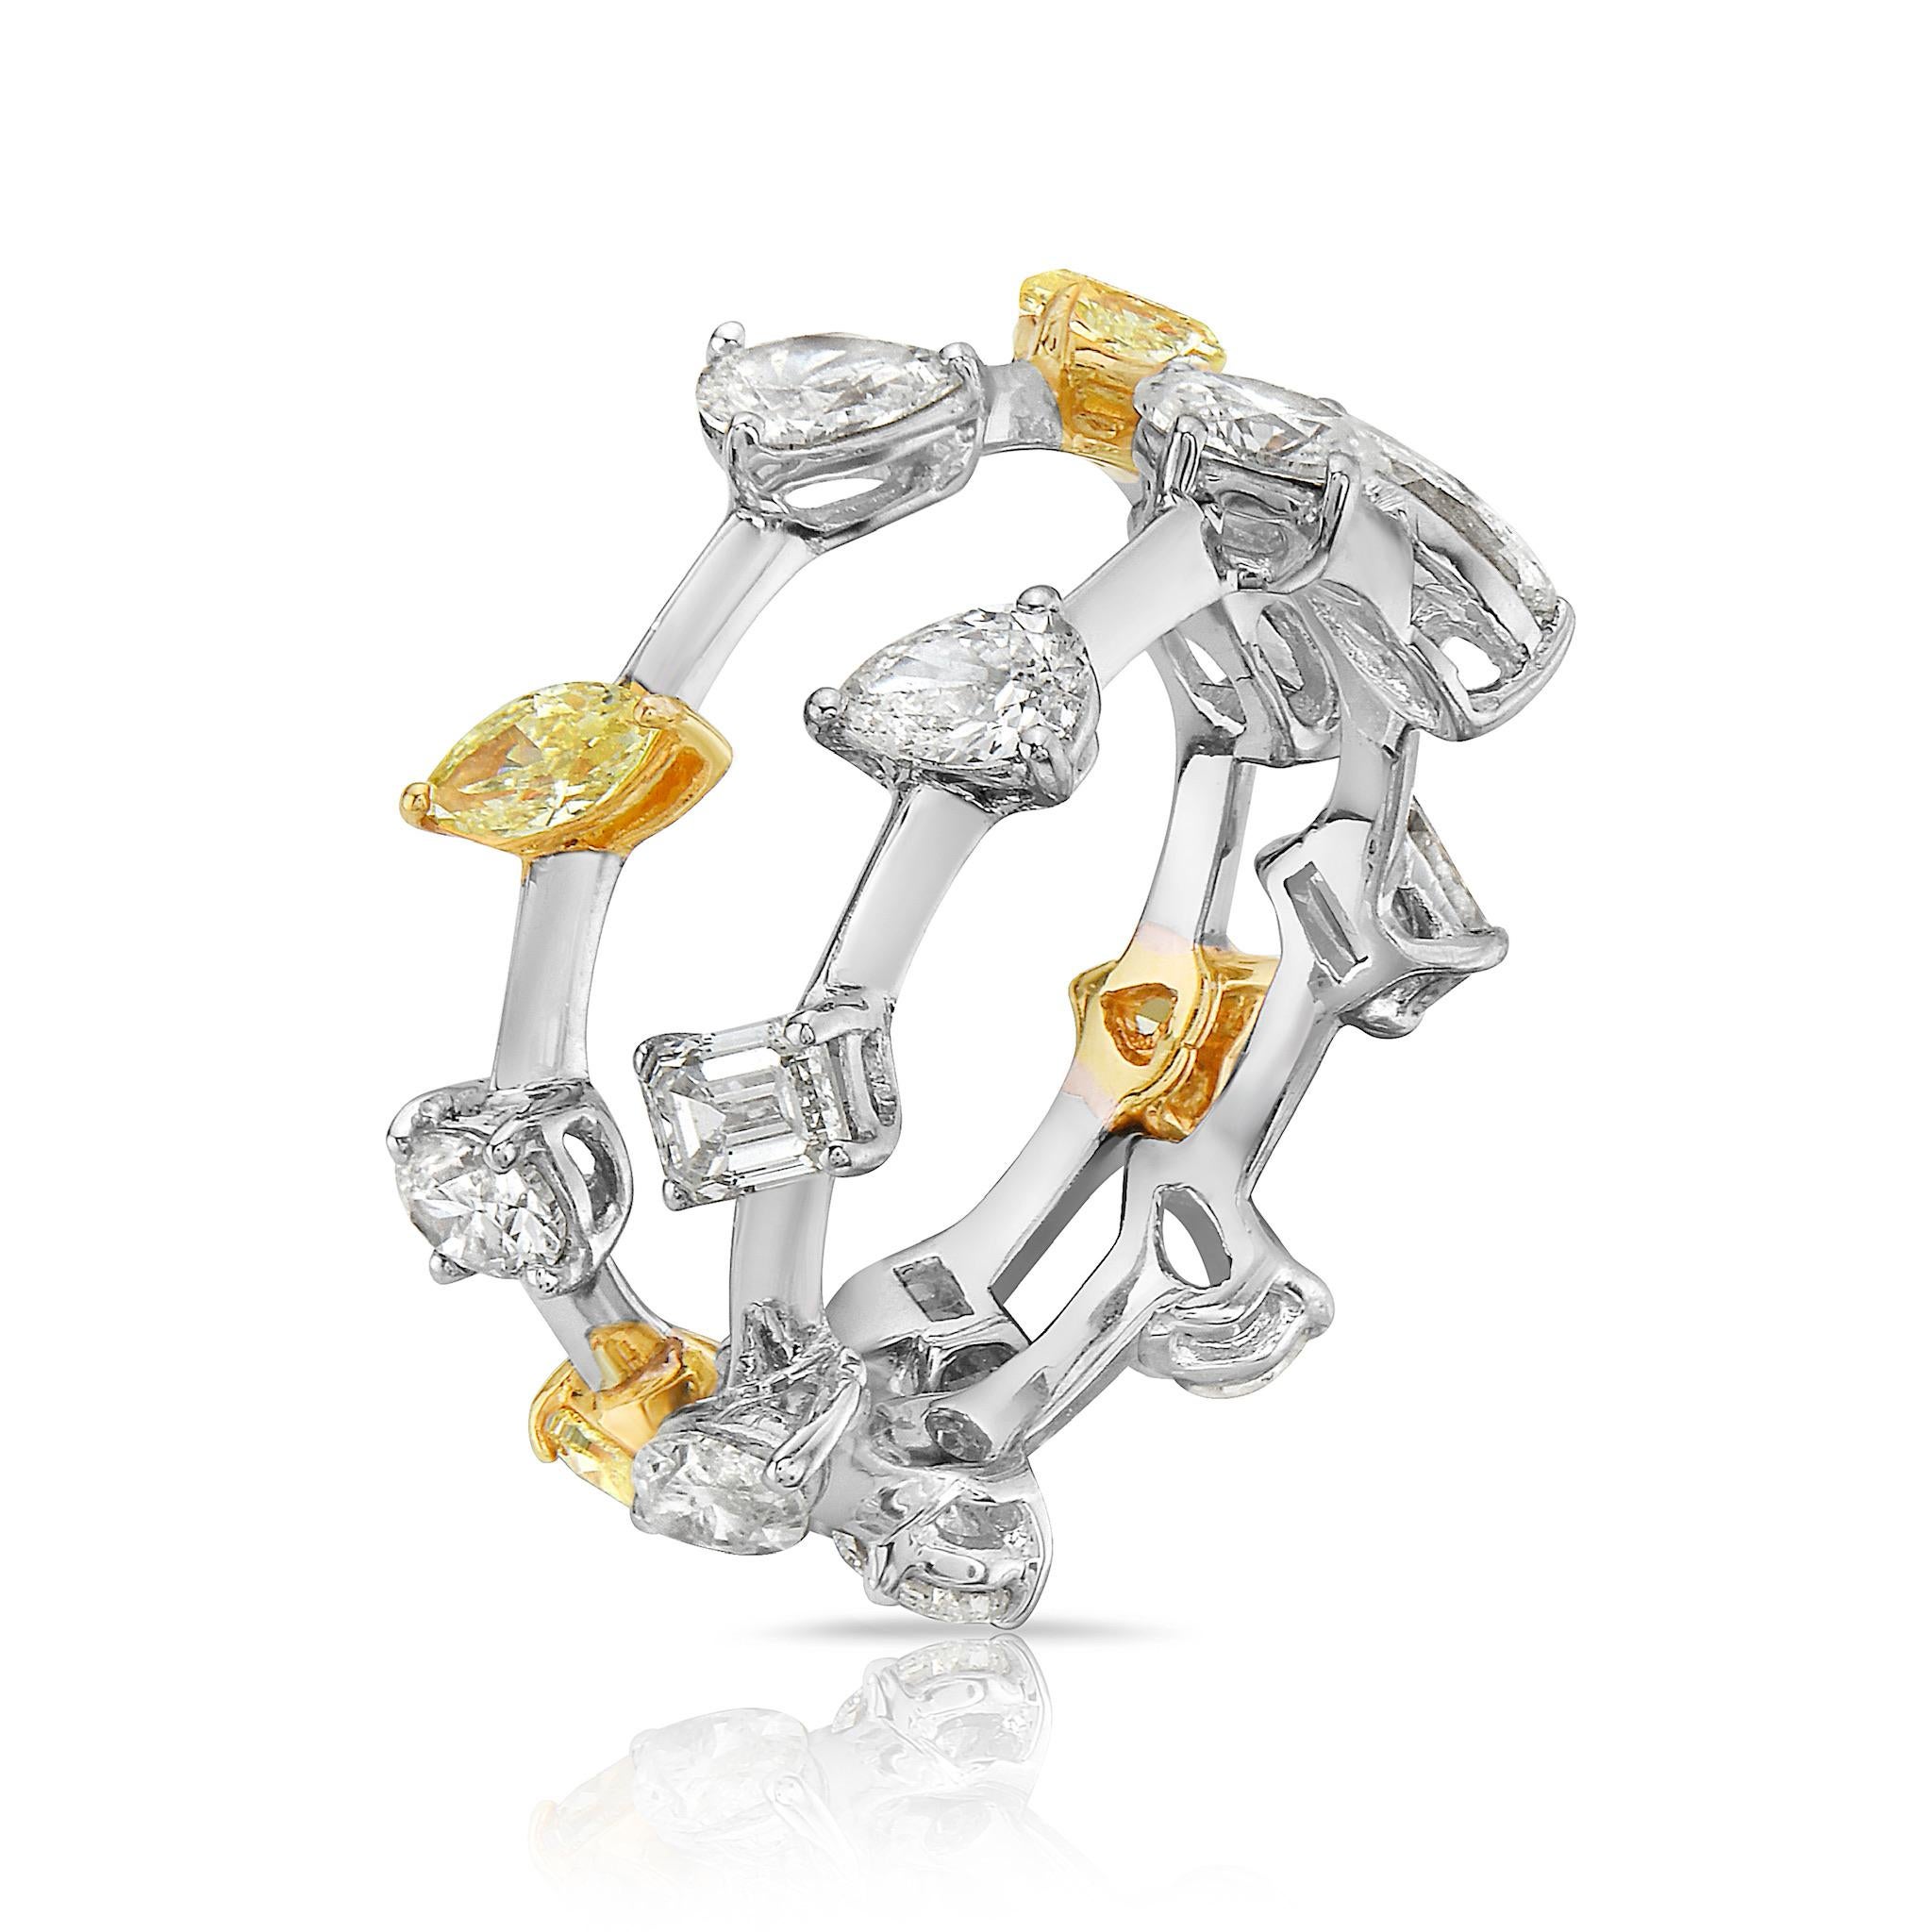 Perfect to add to your stack or wear alone!

1.21 Carats of Yellow and White Mixed Shape Diamonds
VS Clarity
Fancy Intense Yellow Diamonds
Set in 18k White & Yellow Gold 
 
Making Extraordinary Attainable with Rare Colors

